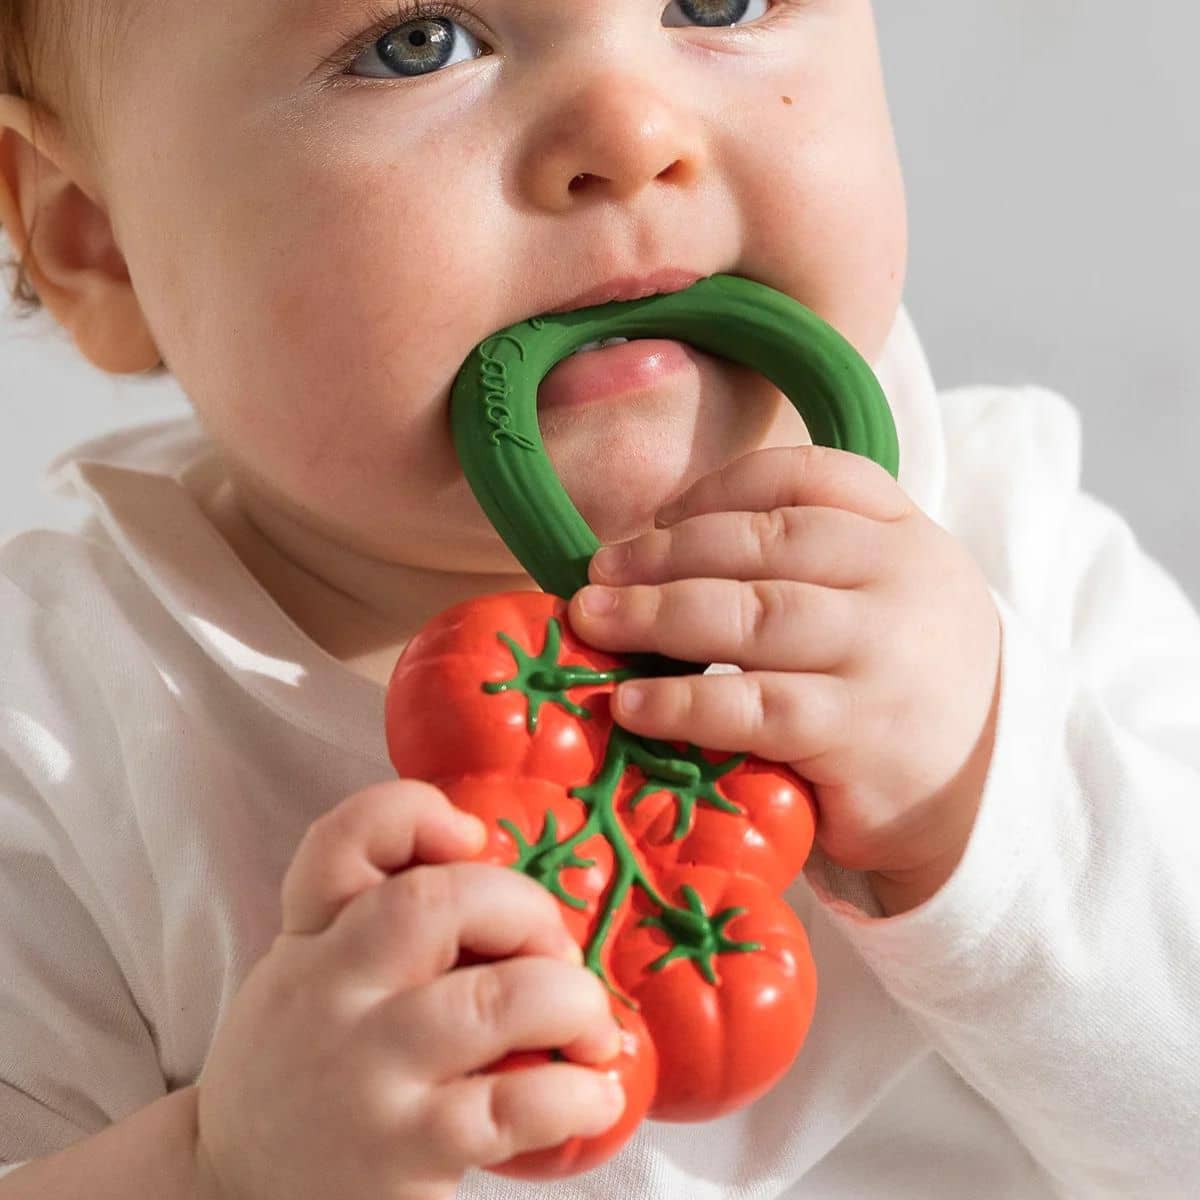 Tomatoes Chewable Rattle by Oli & Carol